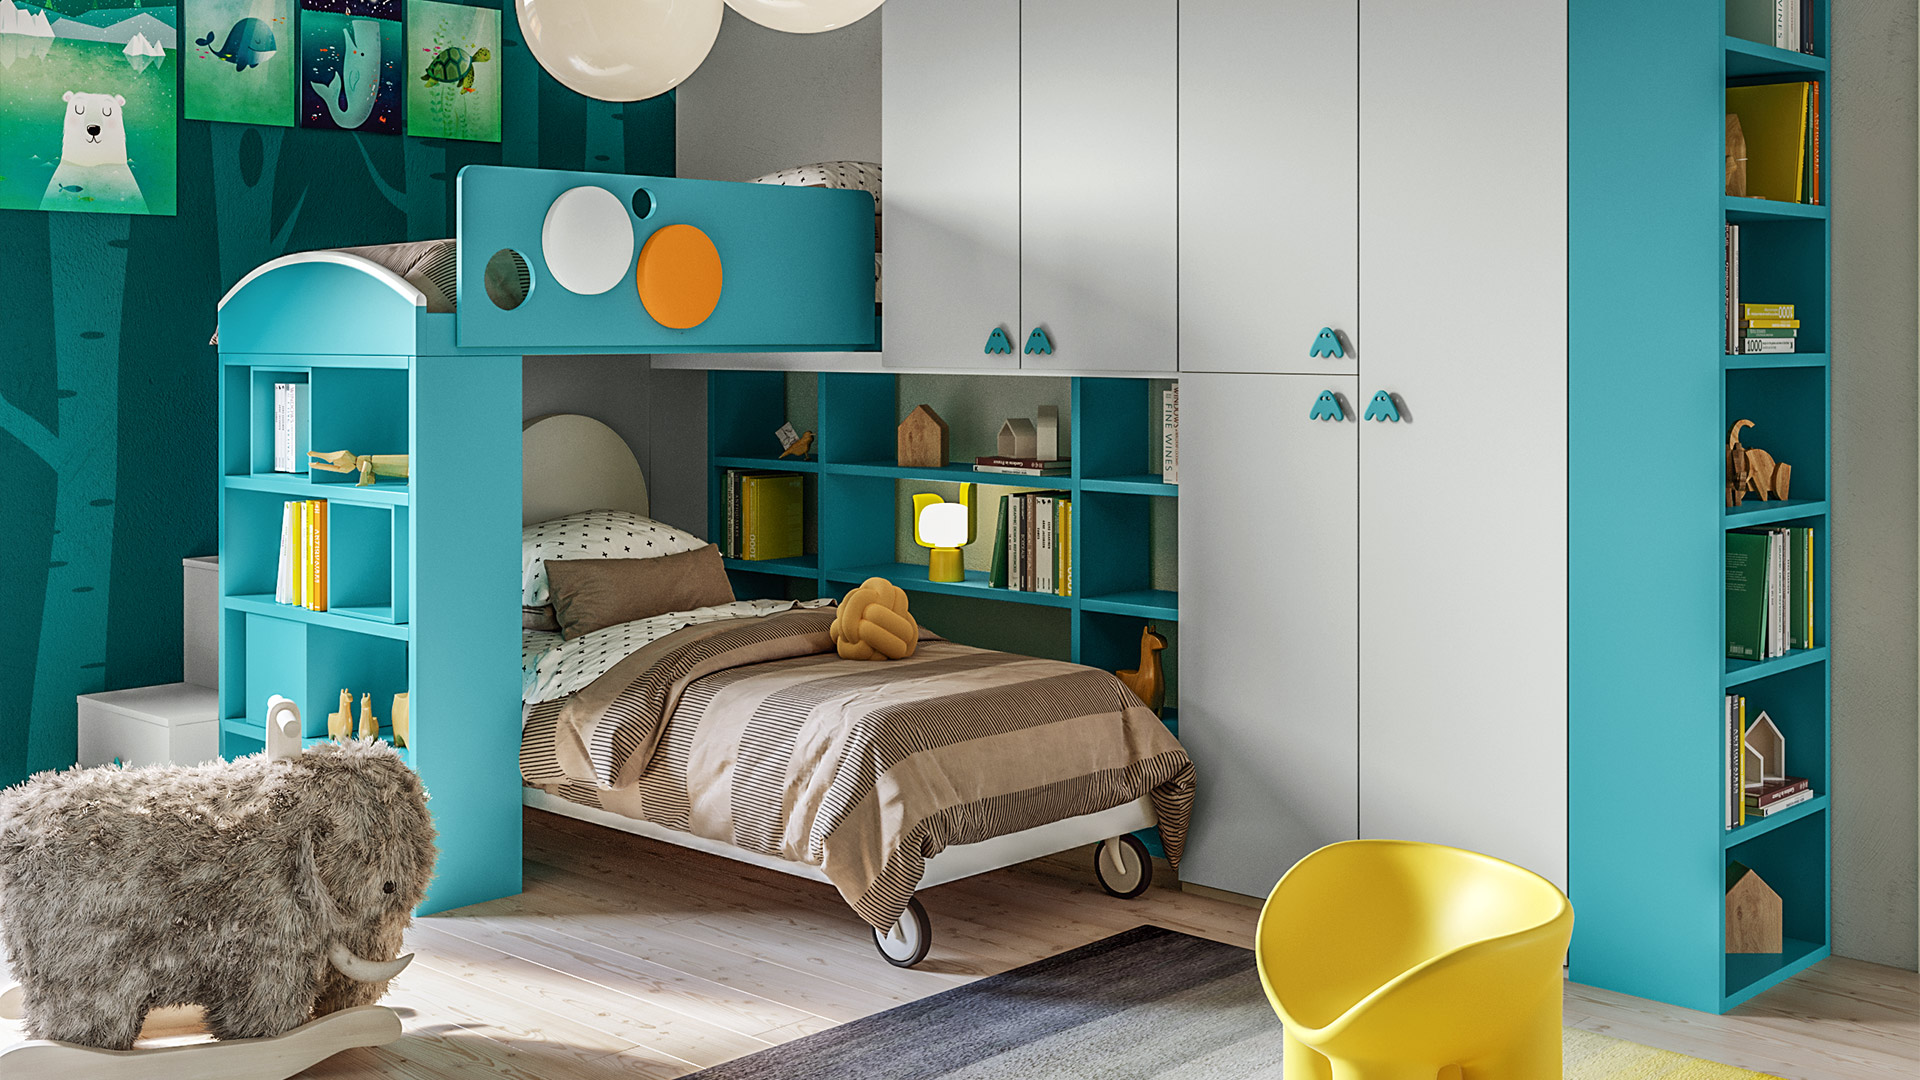 The bunk bed, the solution to optimize the space in the bedroom - Giessegi.it